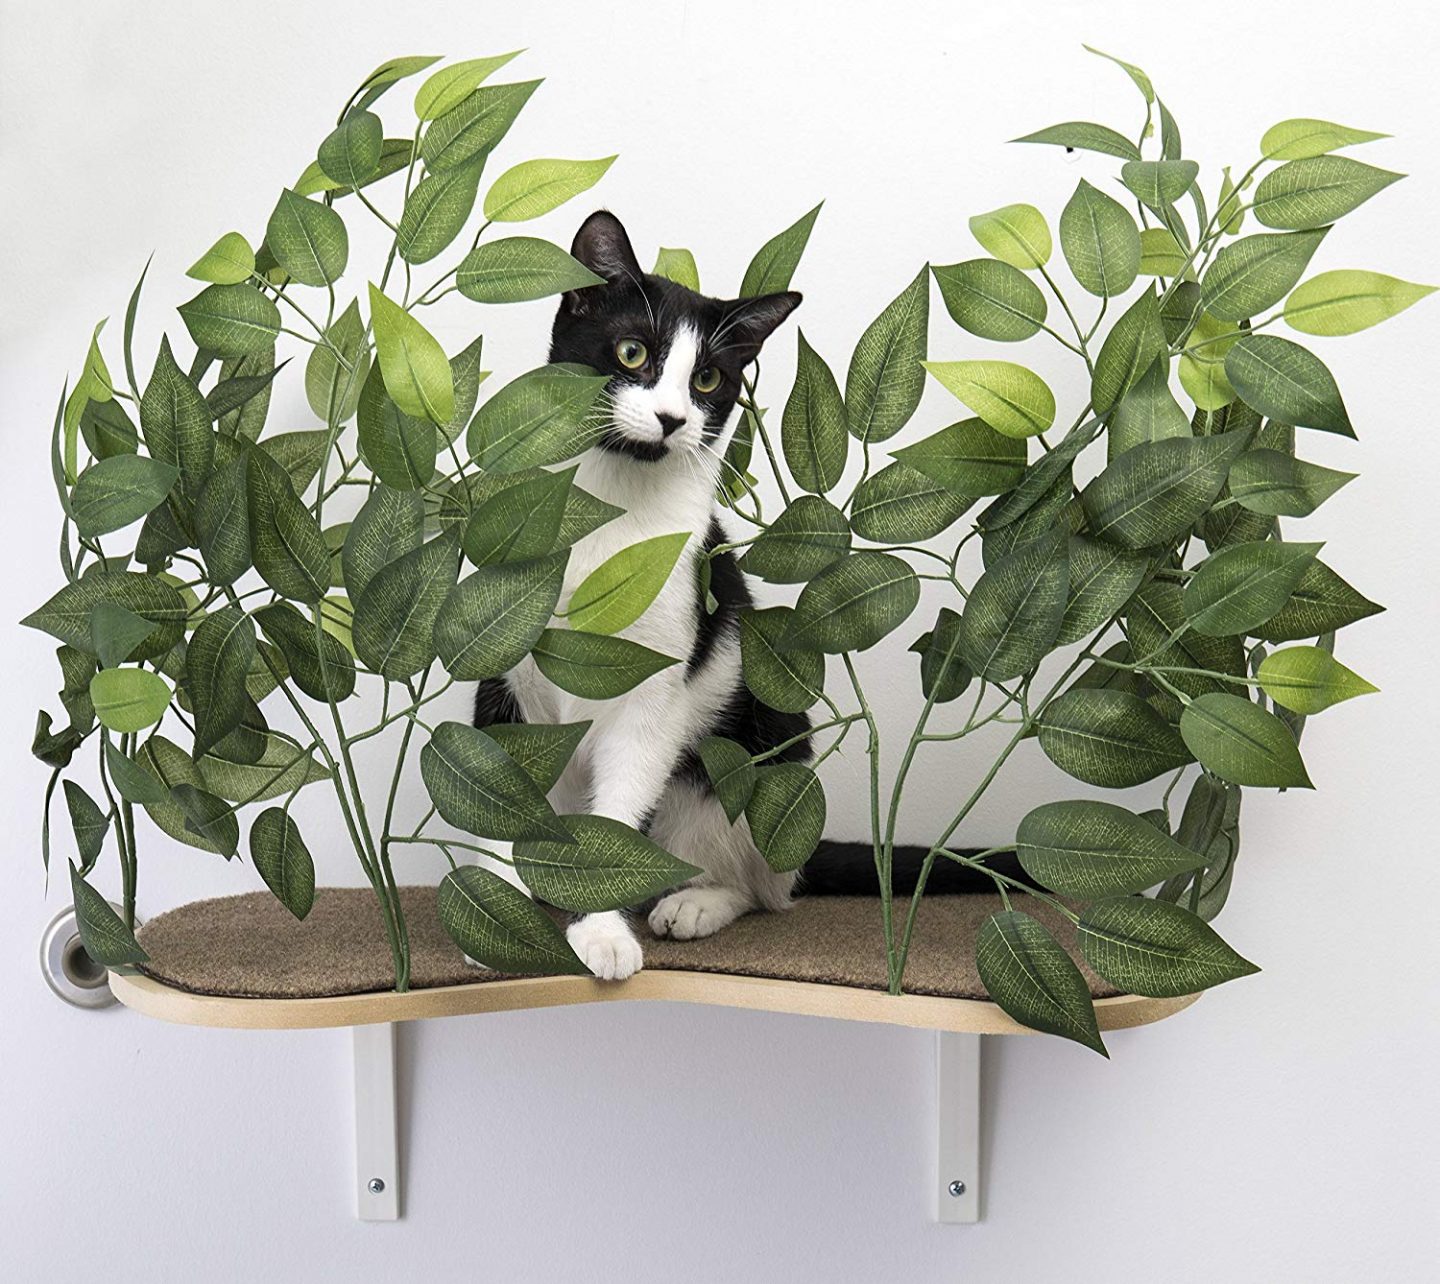 Cat Perch With Pretty Silk Leaves - This wall mounted cat perch is a mini cat tree with leaves and branches. Cats love it!